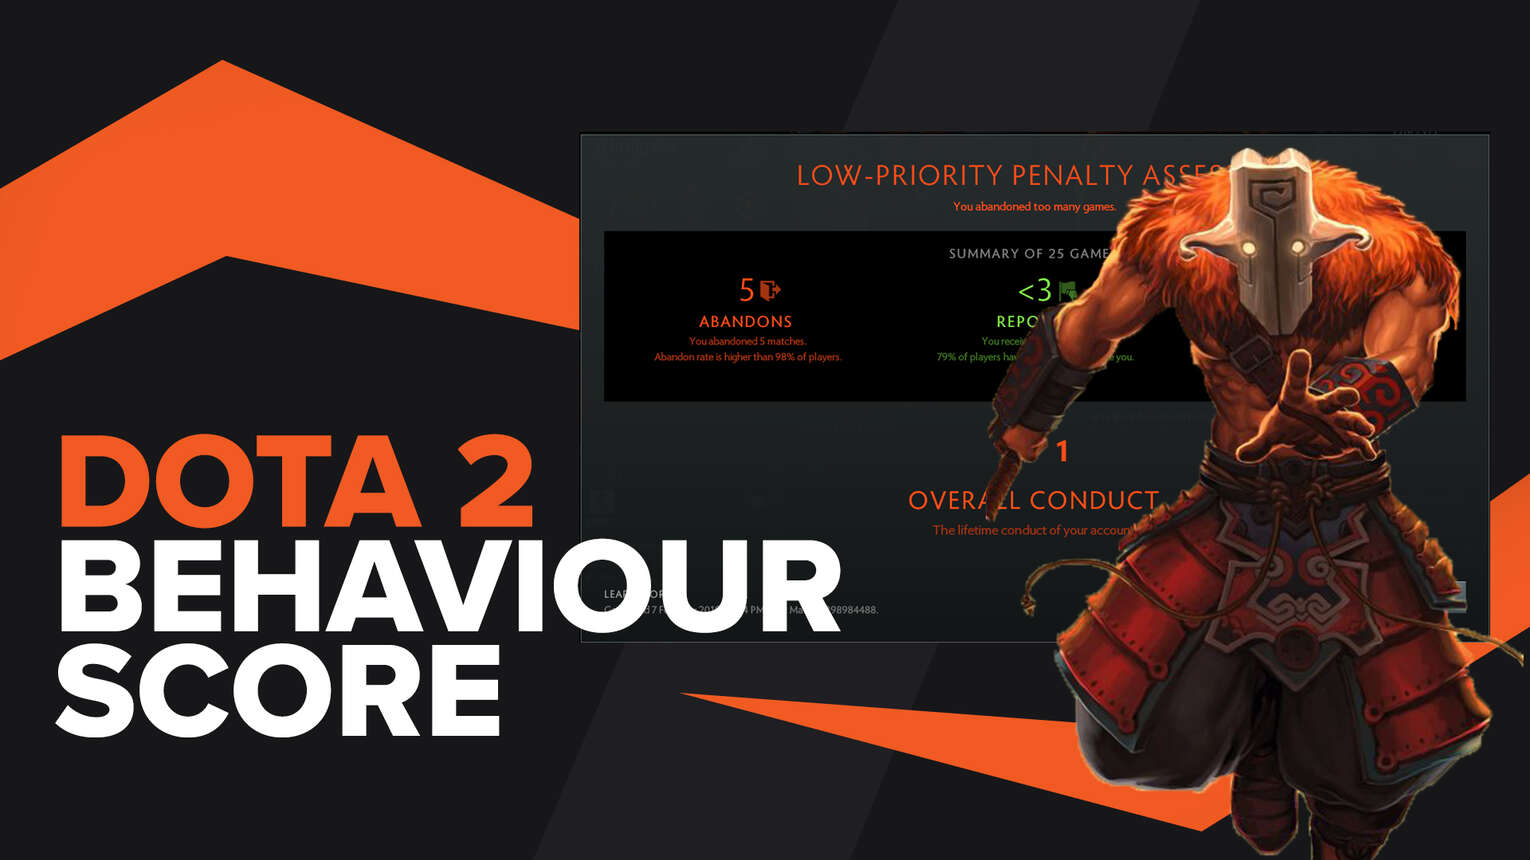 How to see your Behavior Score in Dota 2 in a few clicks